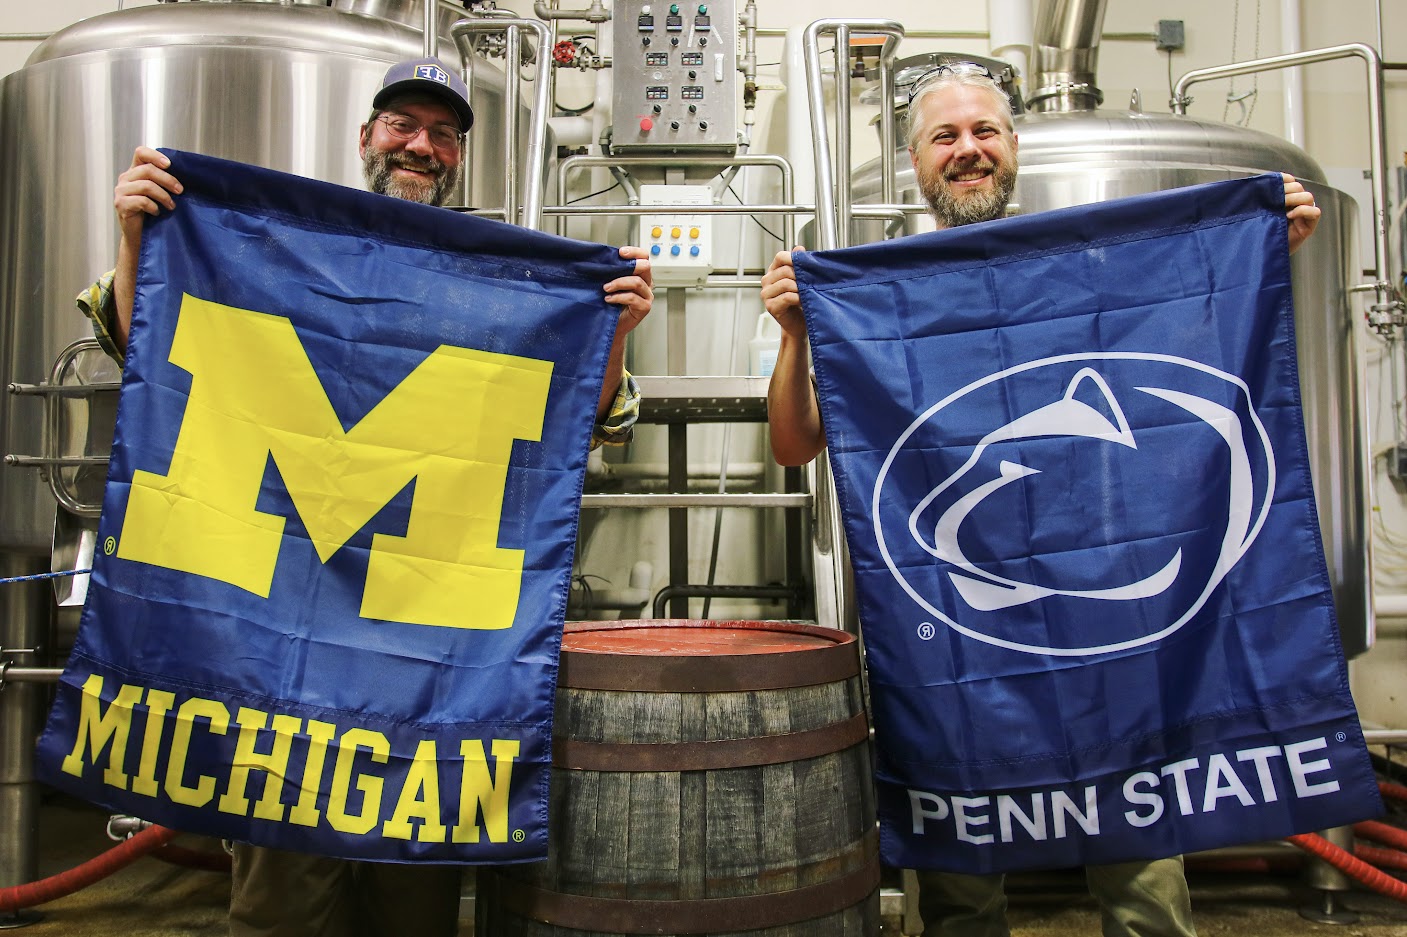 Two people holding a University of Michigan banner and Penn State banner